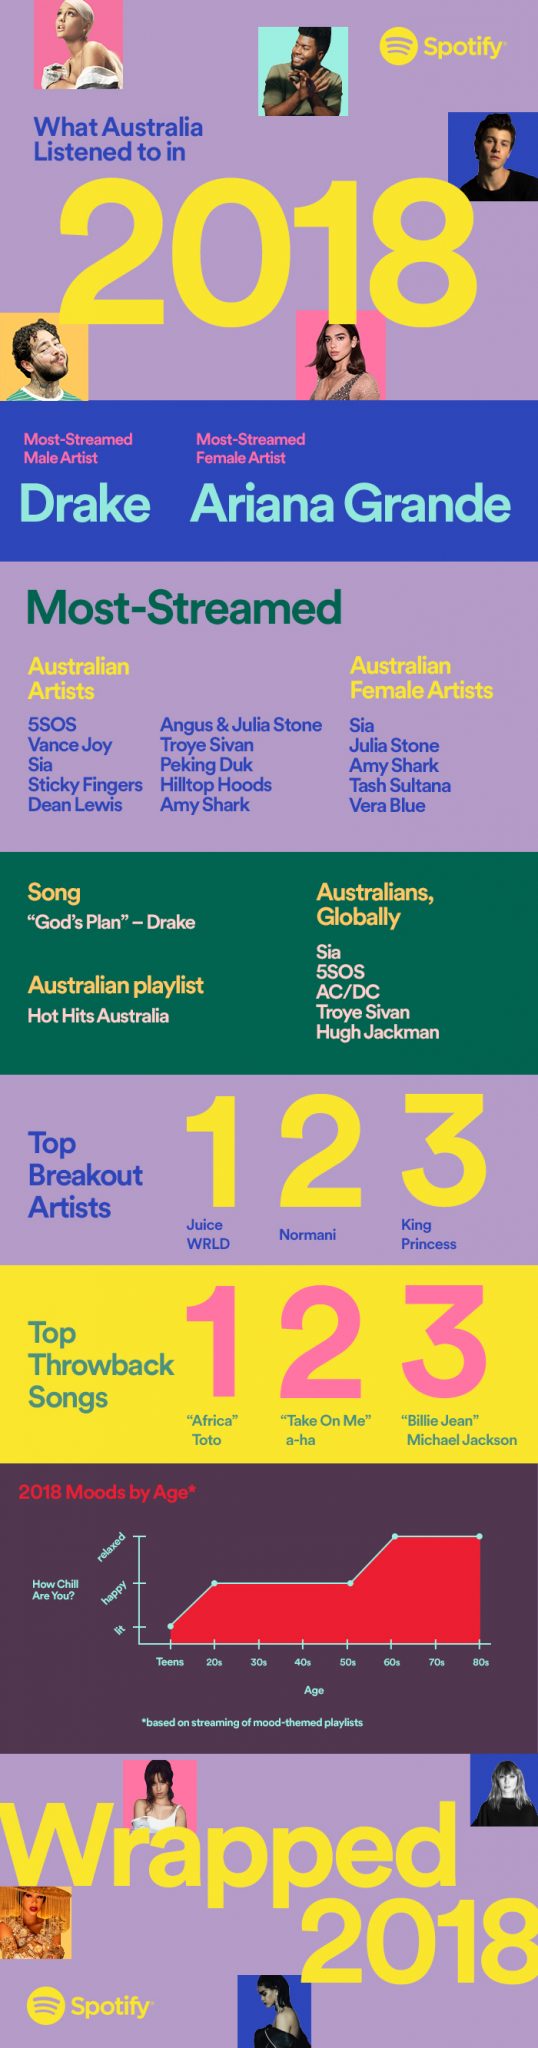 spotify infographic 2018